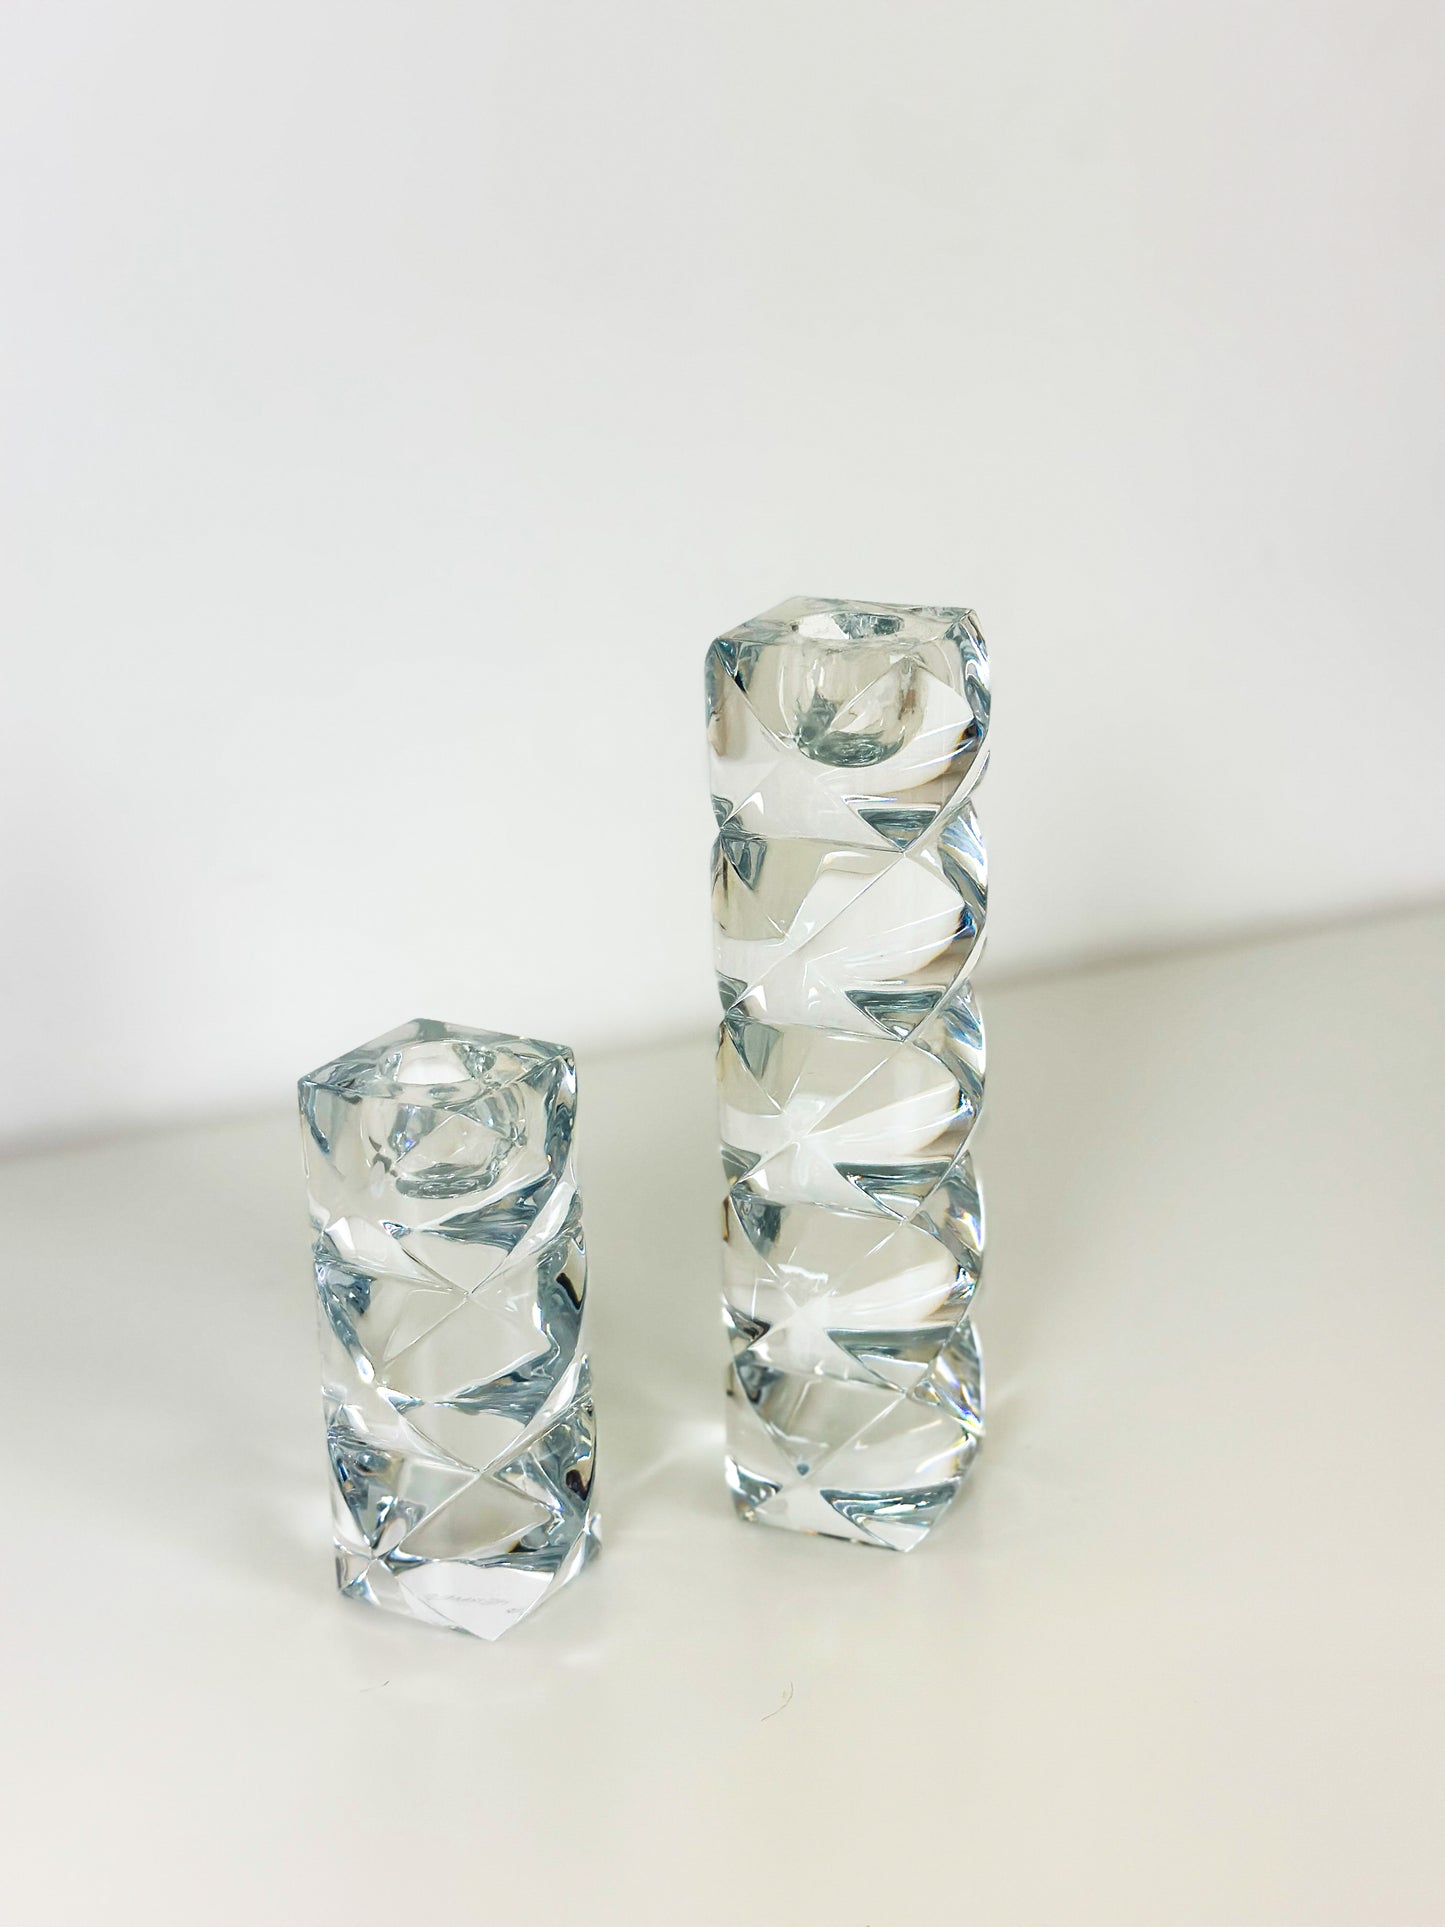 HERMES Crystal Candle holders